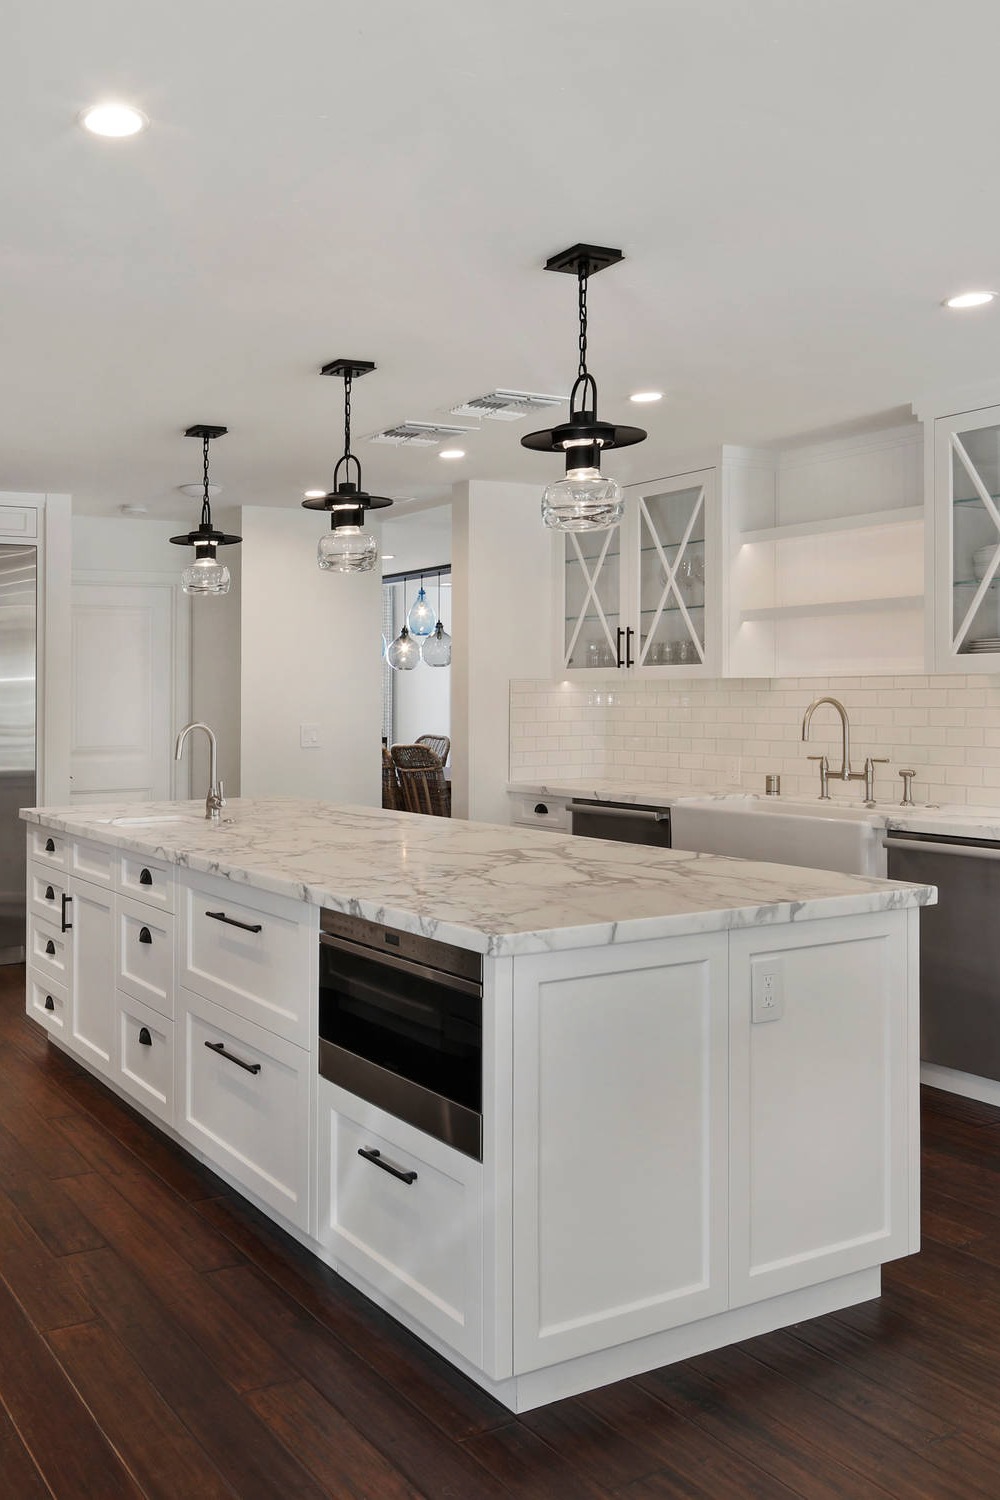 Brown Hardwood Flooring White Cabinetry Marble Counters Subway Wall Tile Pendant Lightings